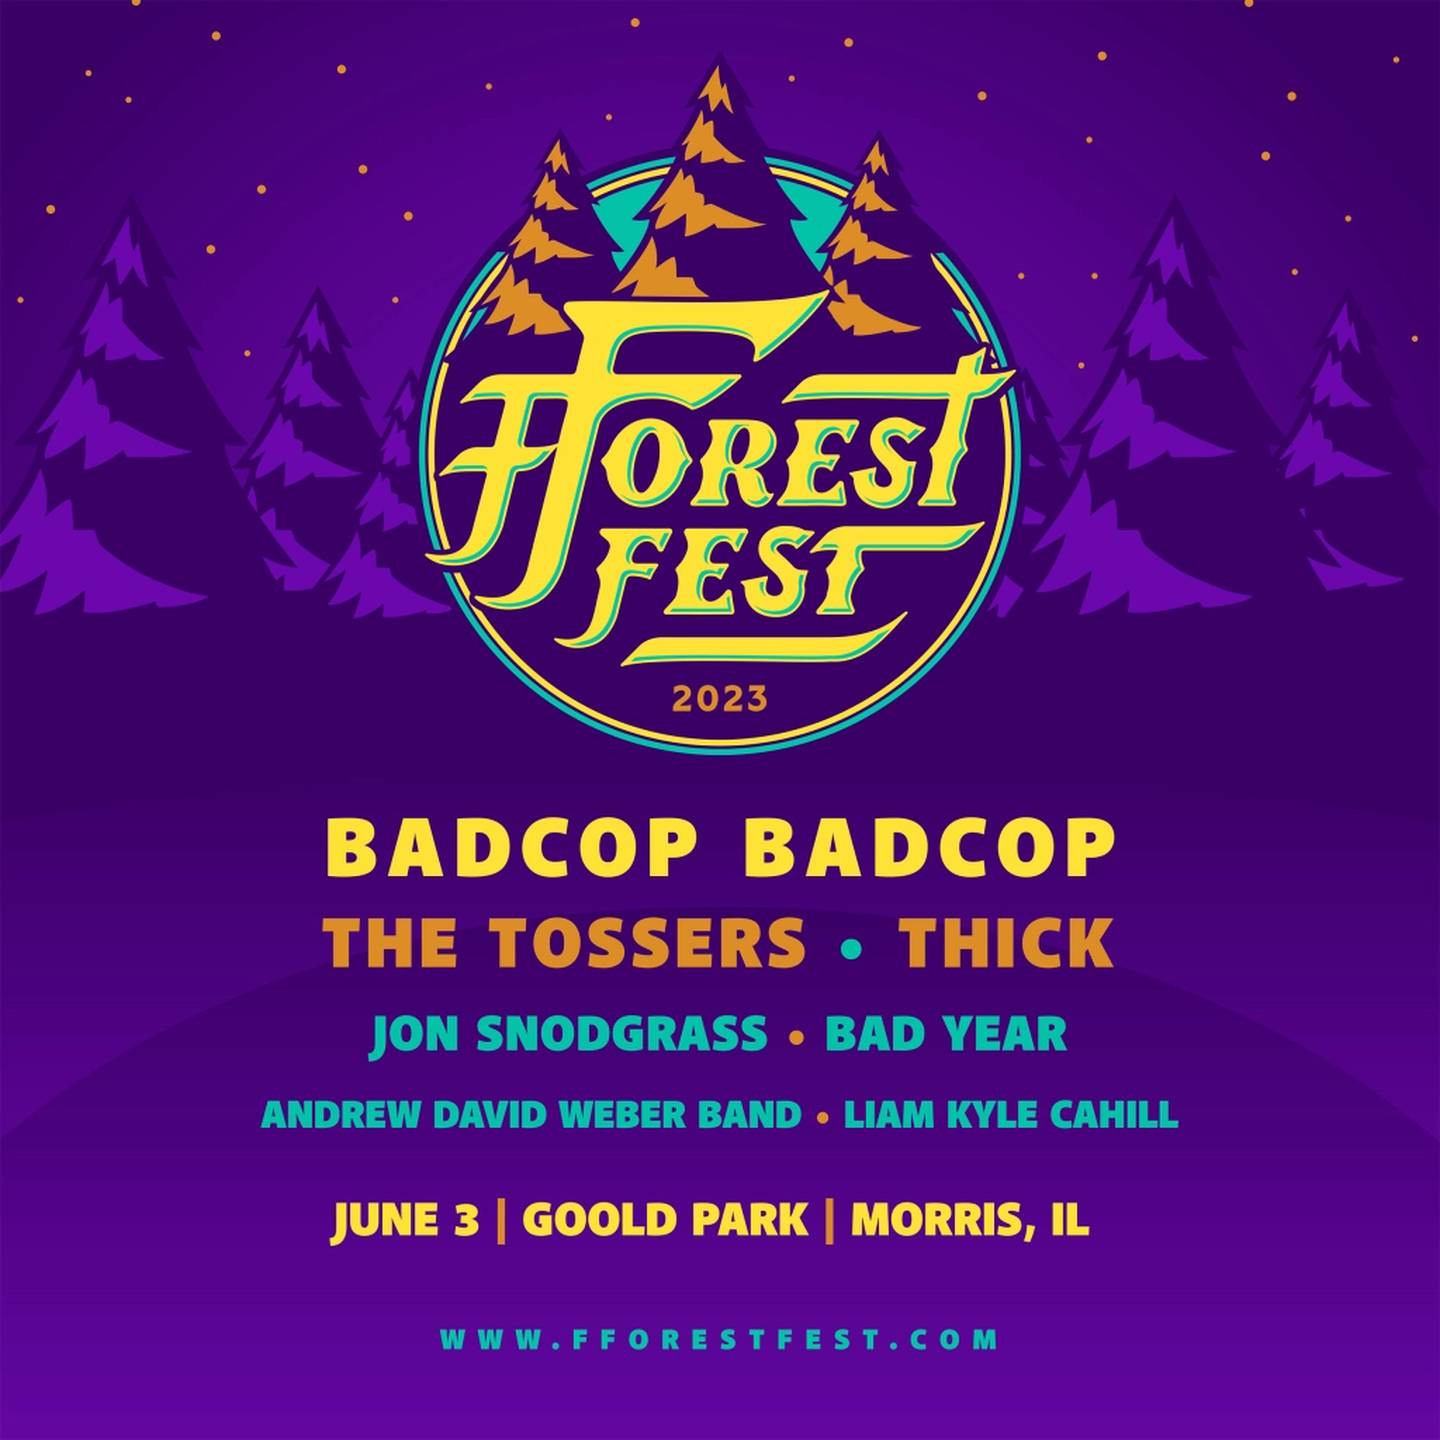 The lineup for this year's fForest Fest.